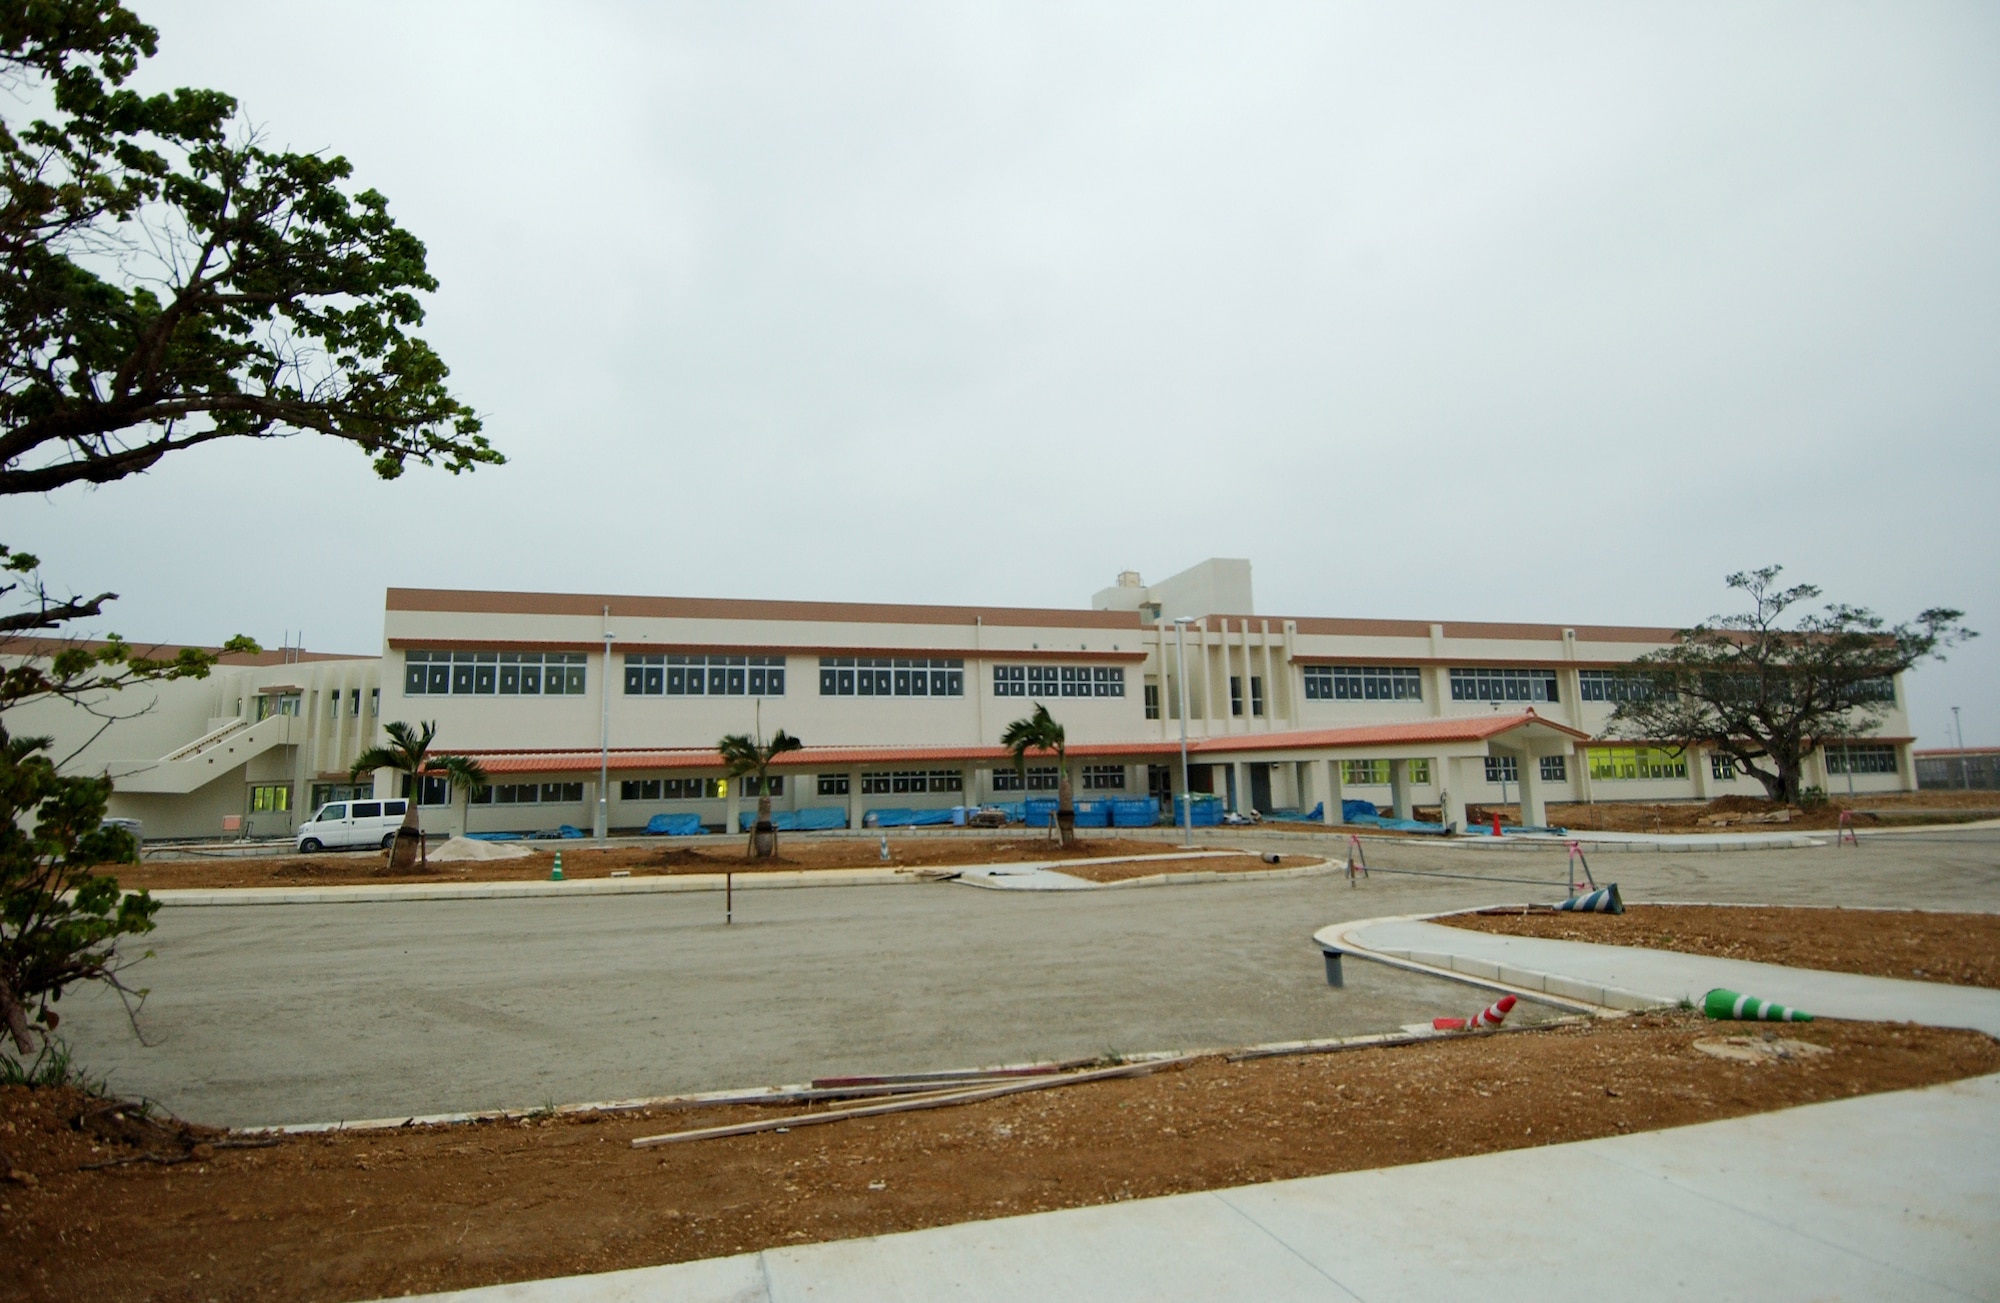 The Ryukyu Middle School is being constructed under the Japanese Facilities Improvement Program at Kadena Air Base. The new middle school will accomodate 500-600 students sixth through eighth-grade students and should be open in August.
(U.S. Air Force photo/Tech. Sgt. Rey Ramon)